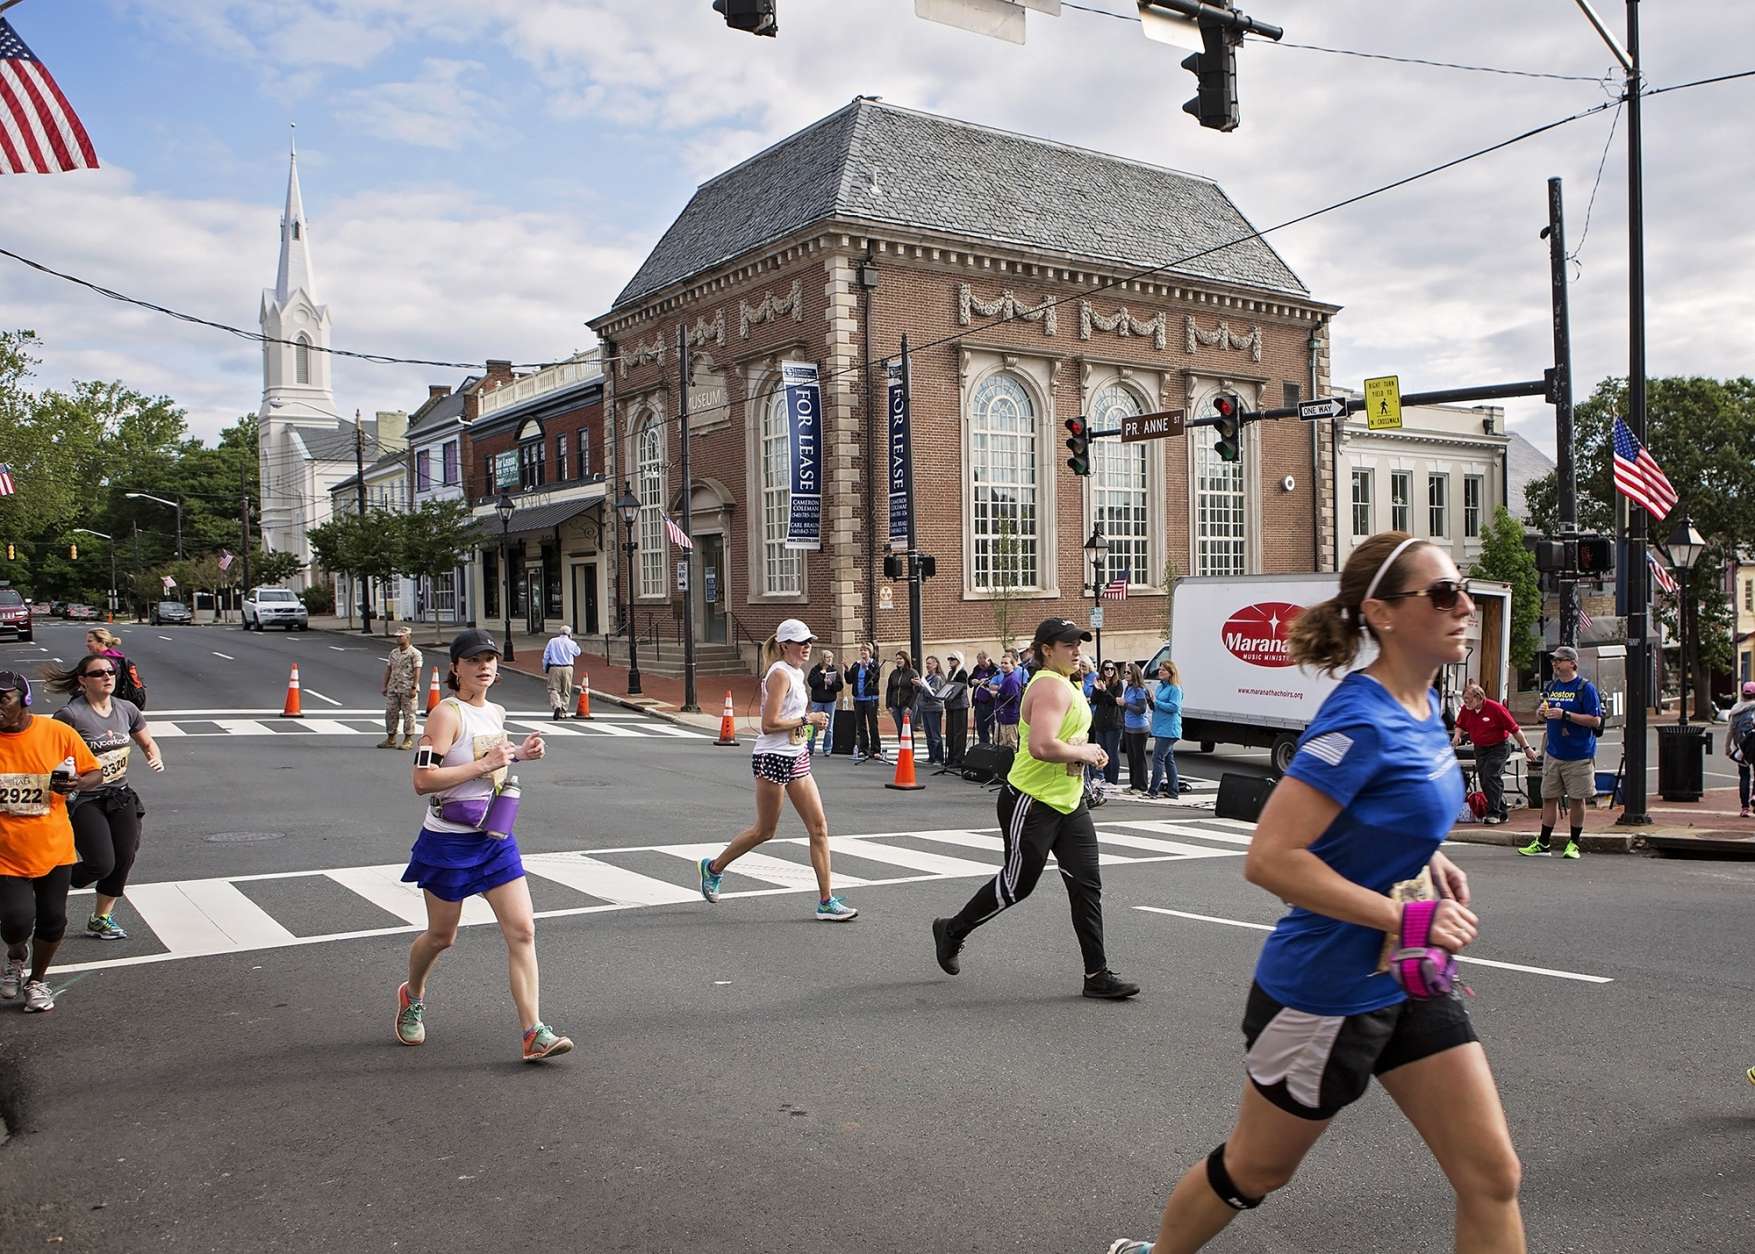 Participants of the 9th Annual Marine Corps Historic Half (MCHH) run the 13.1-mile route from the Fredericksburg Expo Center into historic downtown areas of Fredericksburg, Va., May 15, 2016. The MCHH attracts over 8,000 participants annually and now features the Marine Corps Semper 5ive. (U.S. Marine Corps photo by James H. Frank/Released)